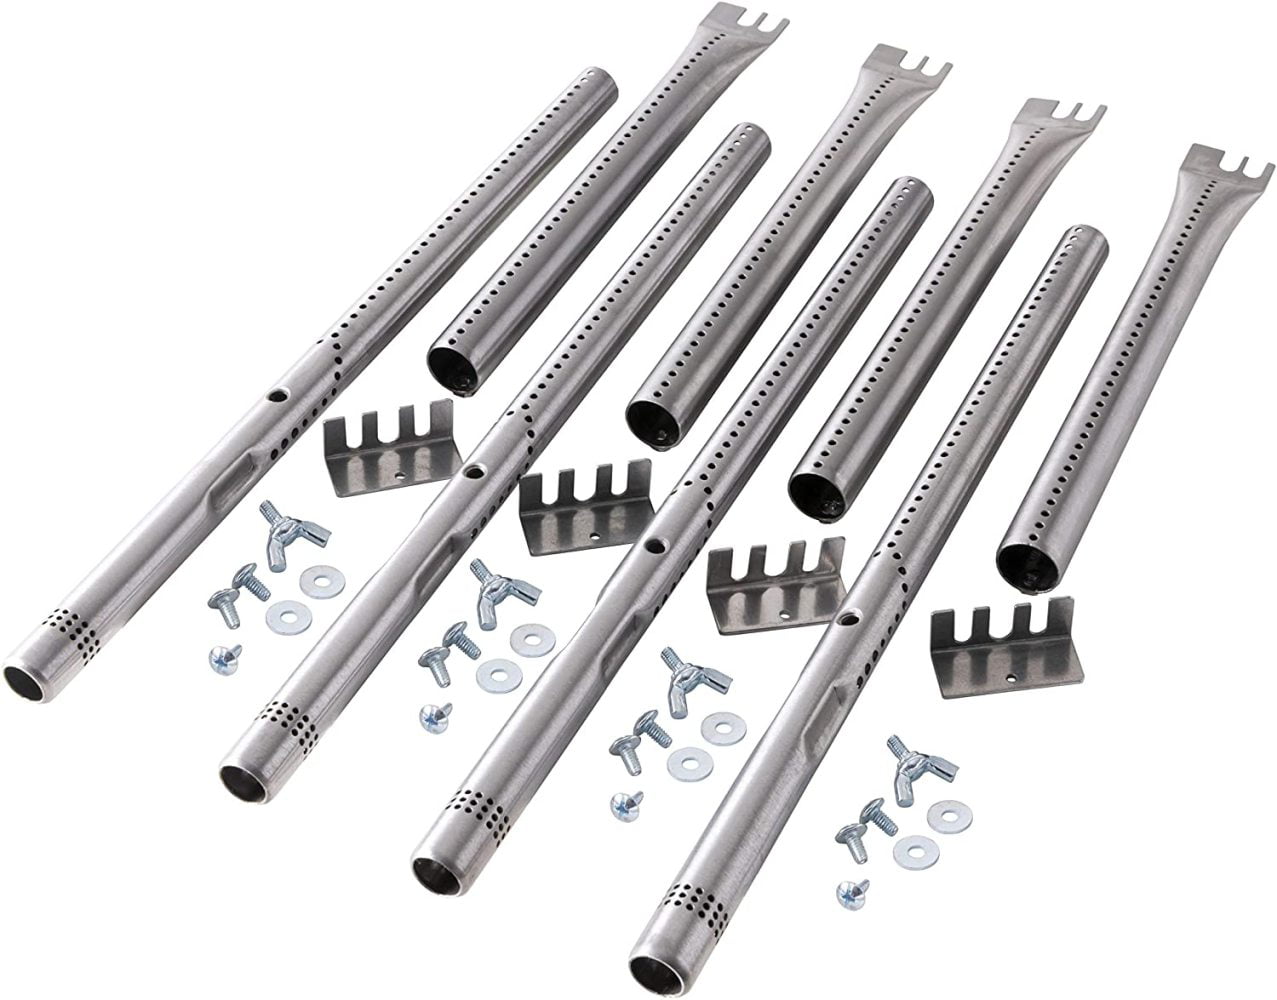 6 Pk GrillPro 14-3/4" to 18-1/2" Stainless Steel Universal Tube Grill Burner 